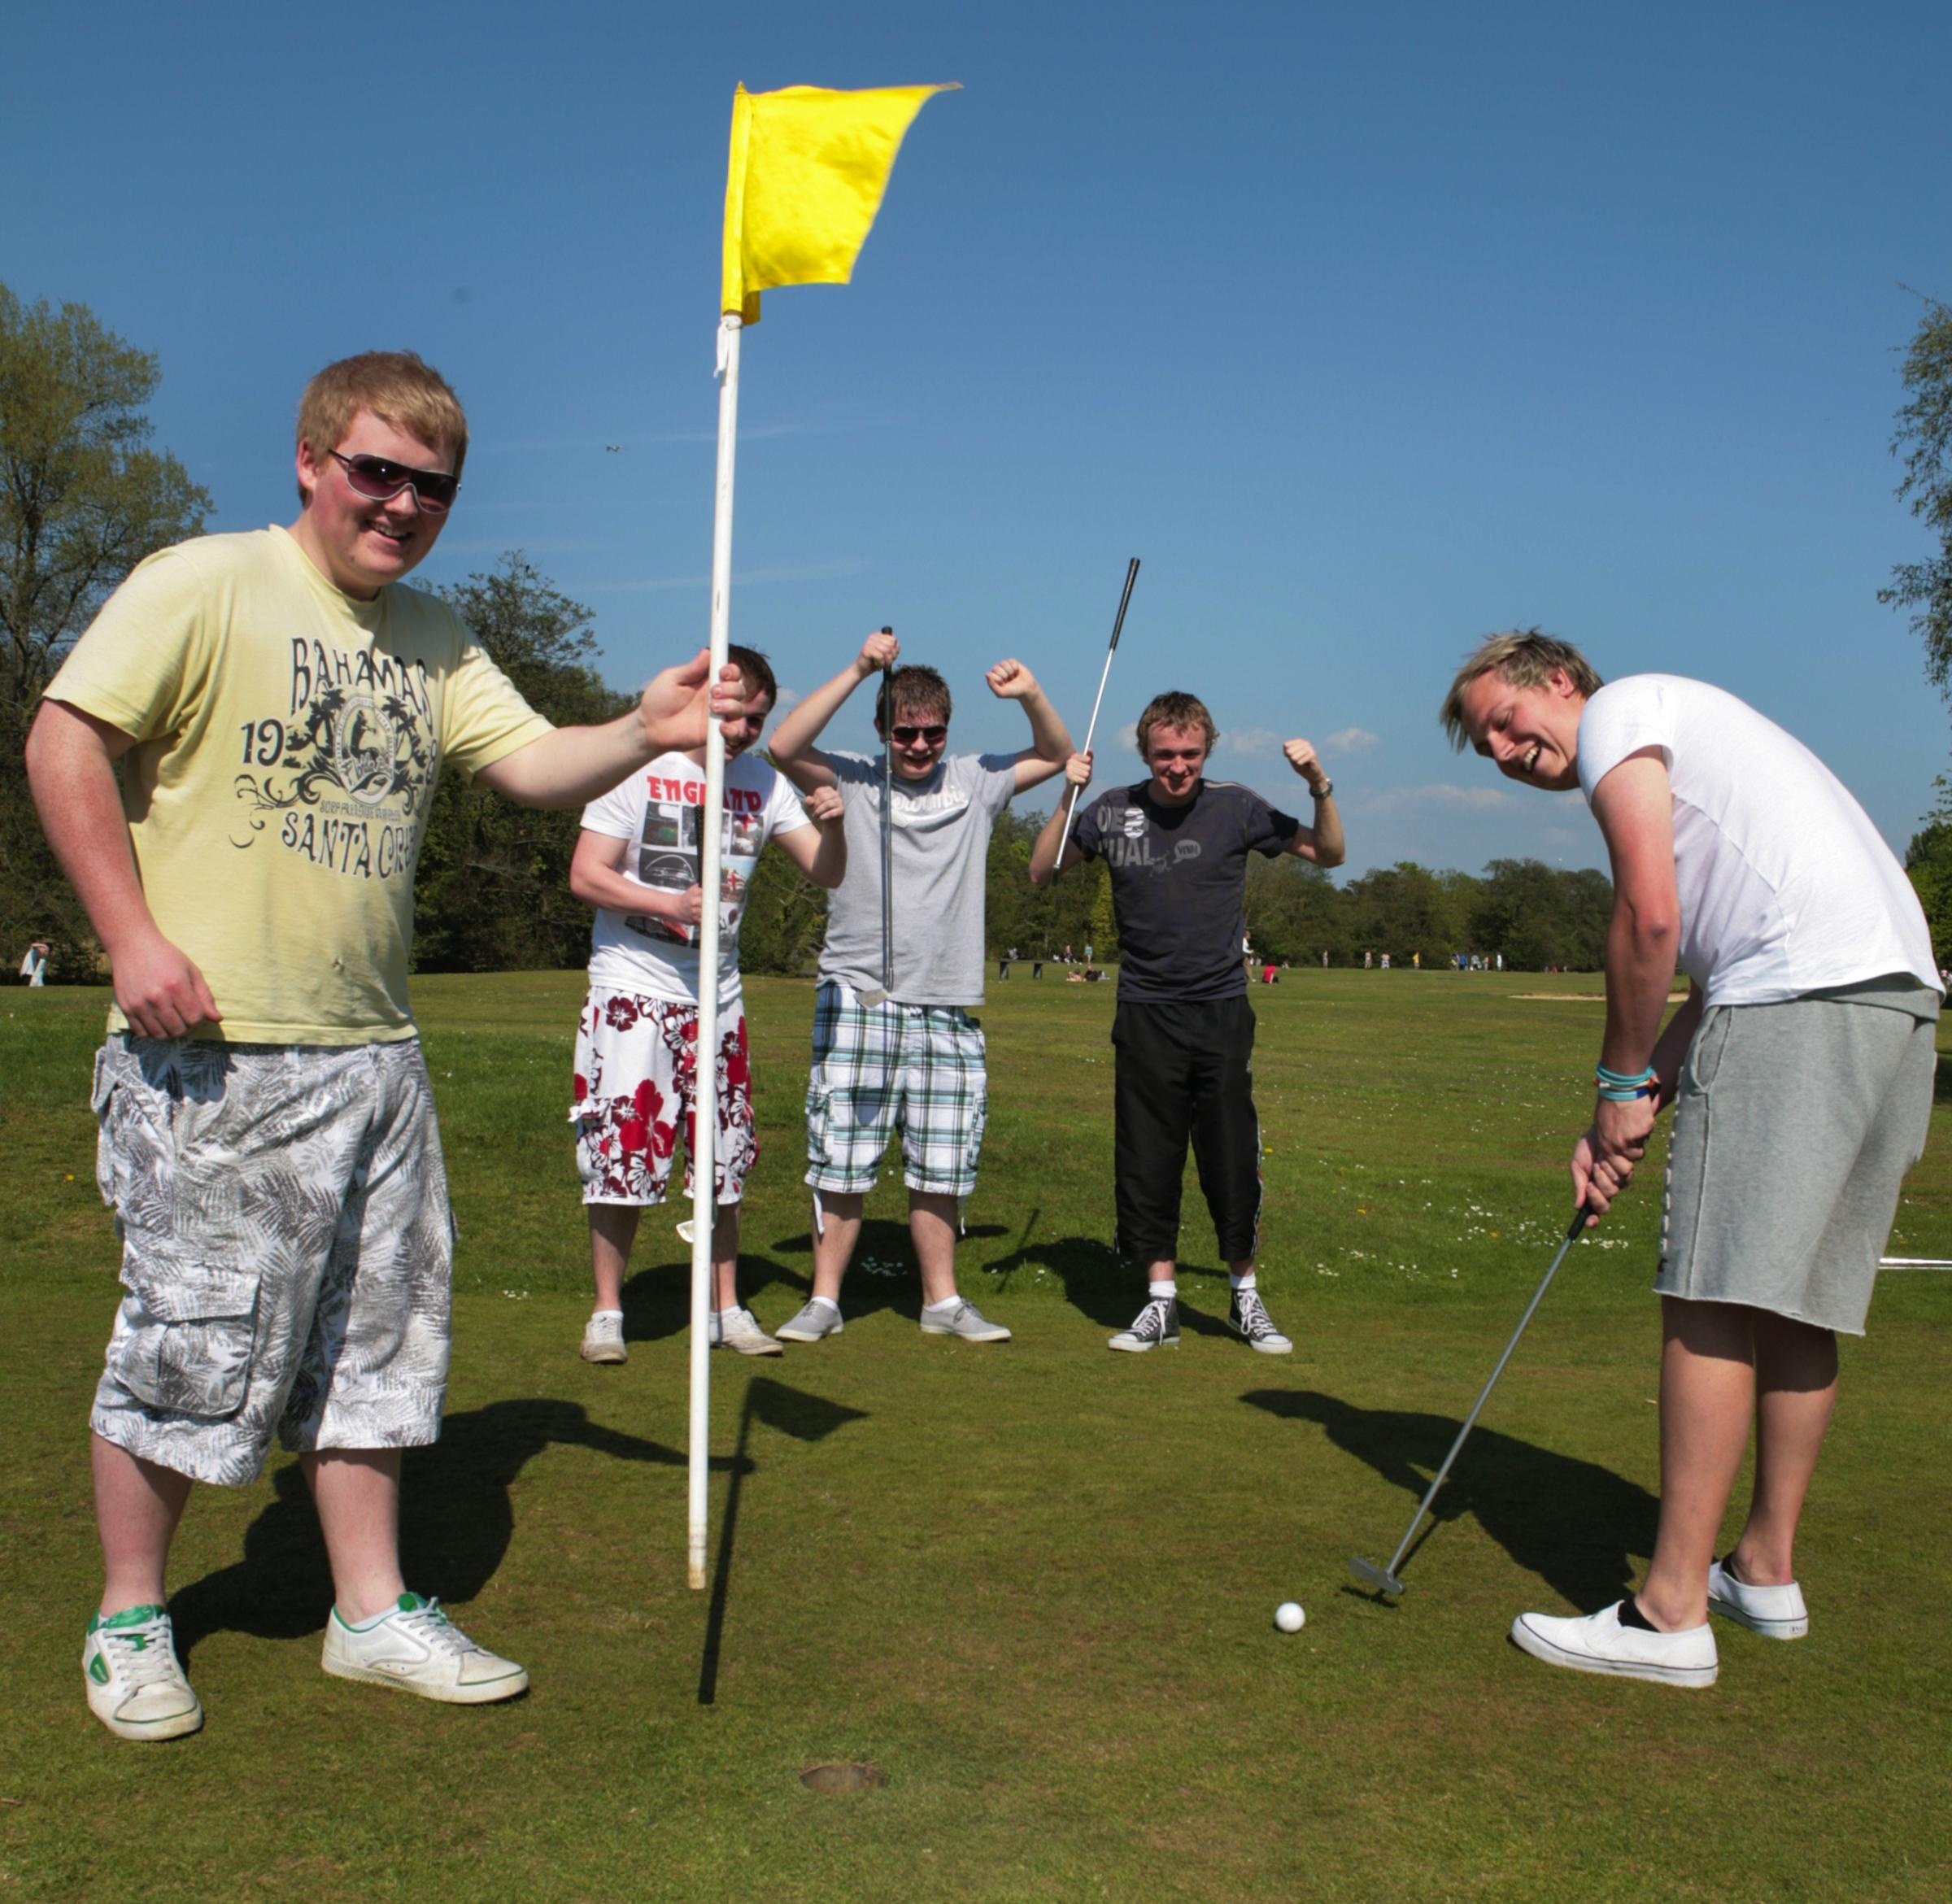 Fourth D. reccomend Southsea pitch and putt